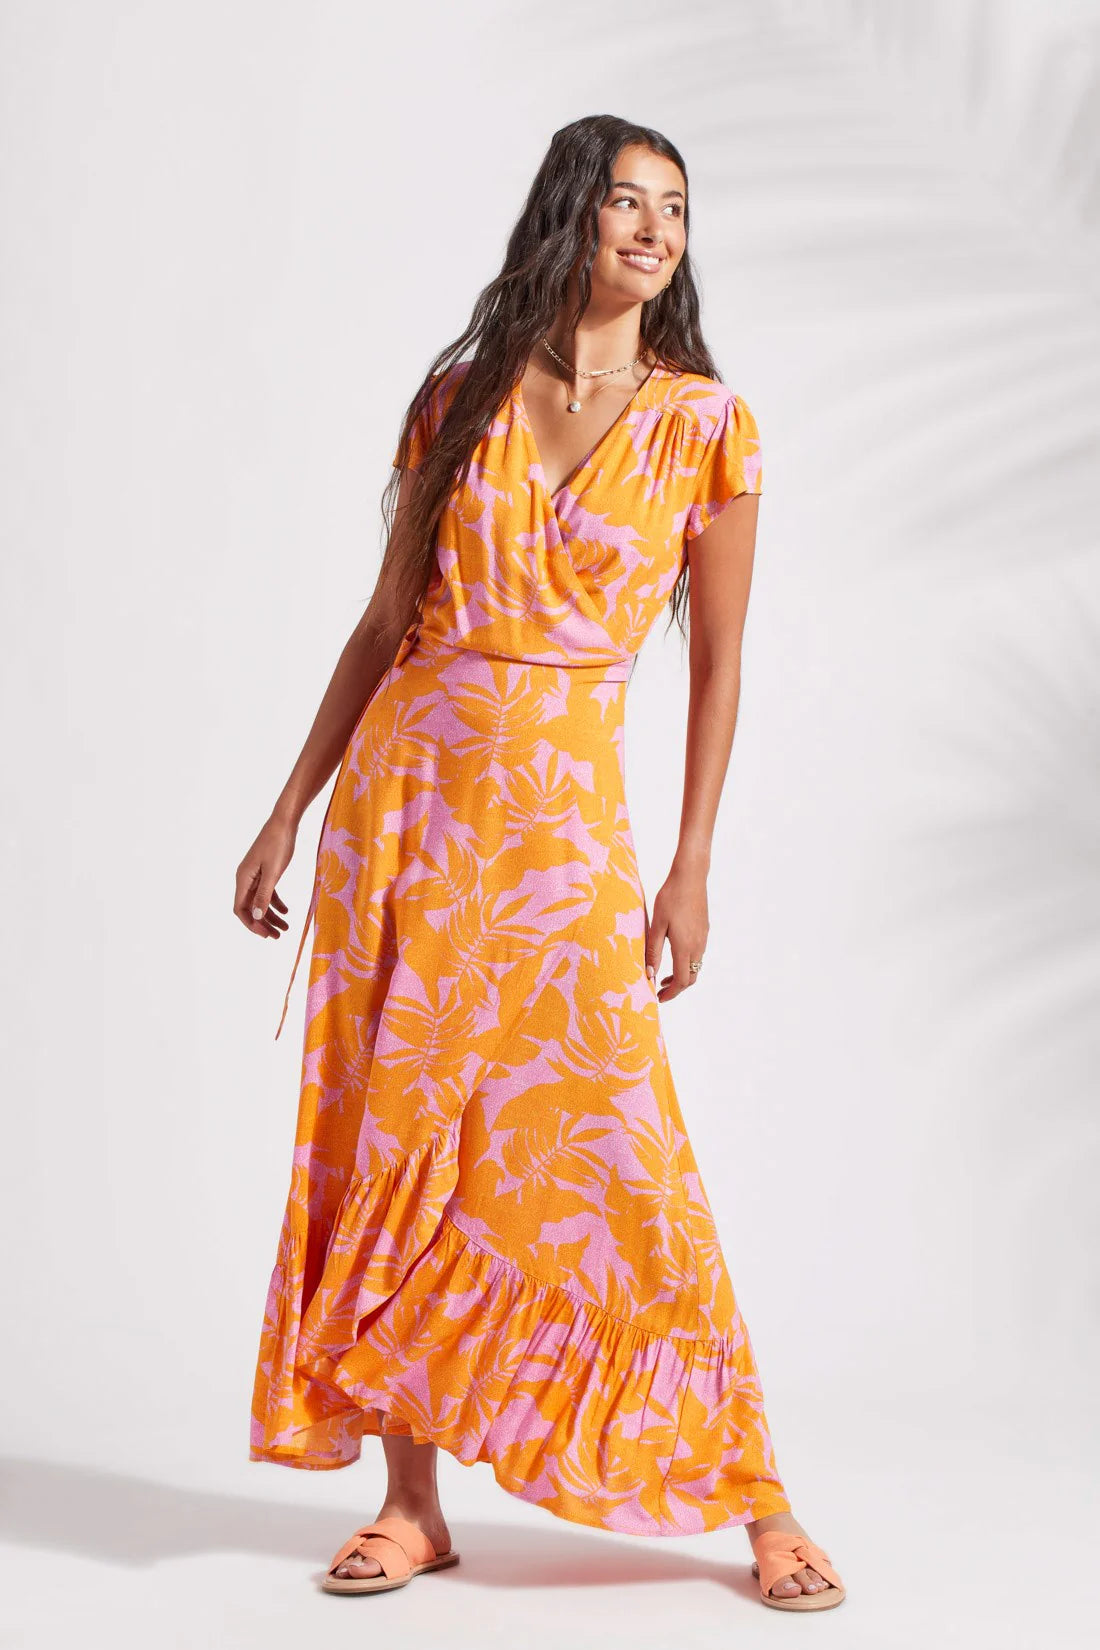 Canary Printed Maxi Dress WIith Short Sleeves